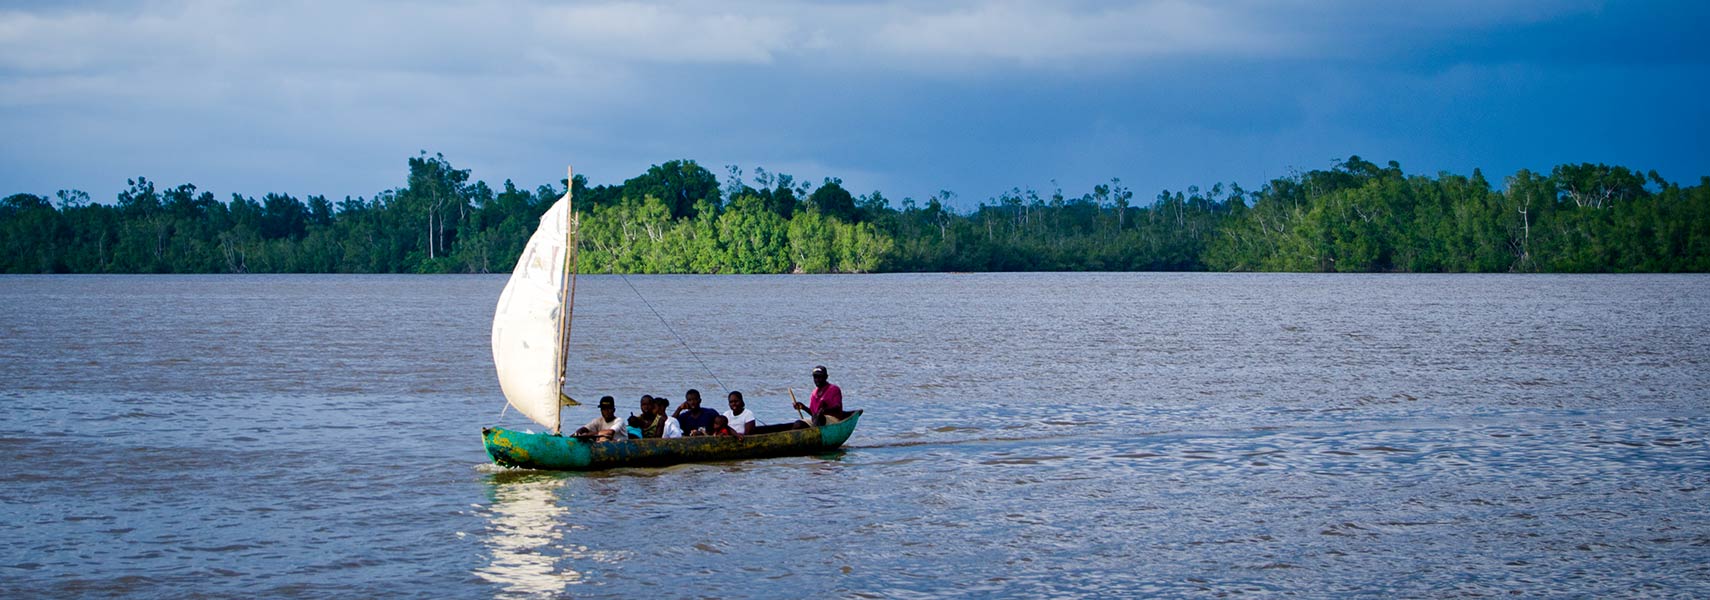 Boat on Cess river in Rivercess County of Liberia